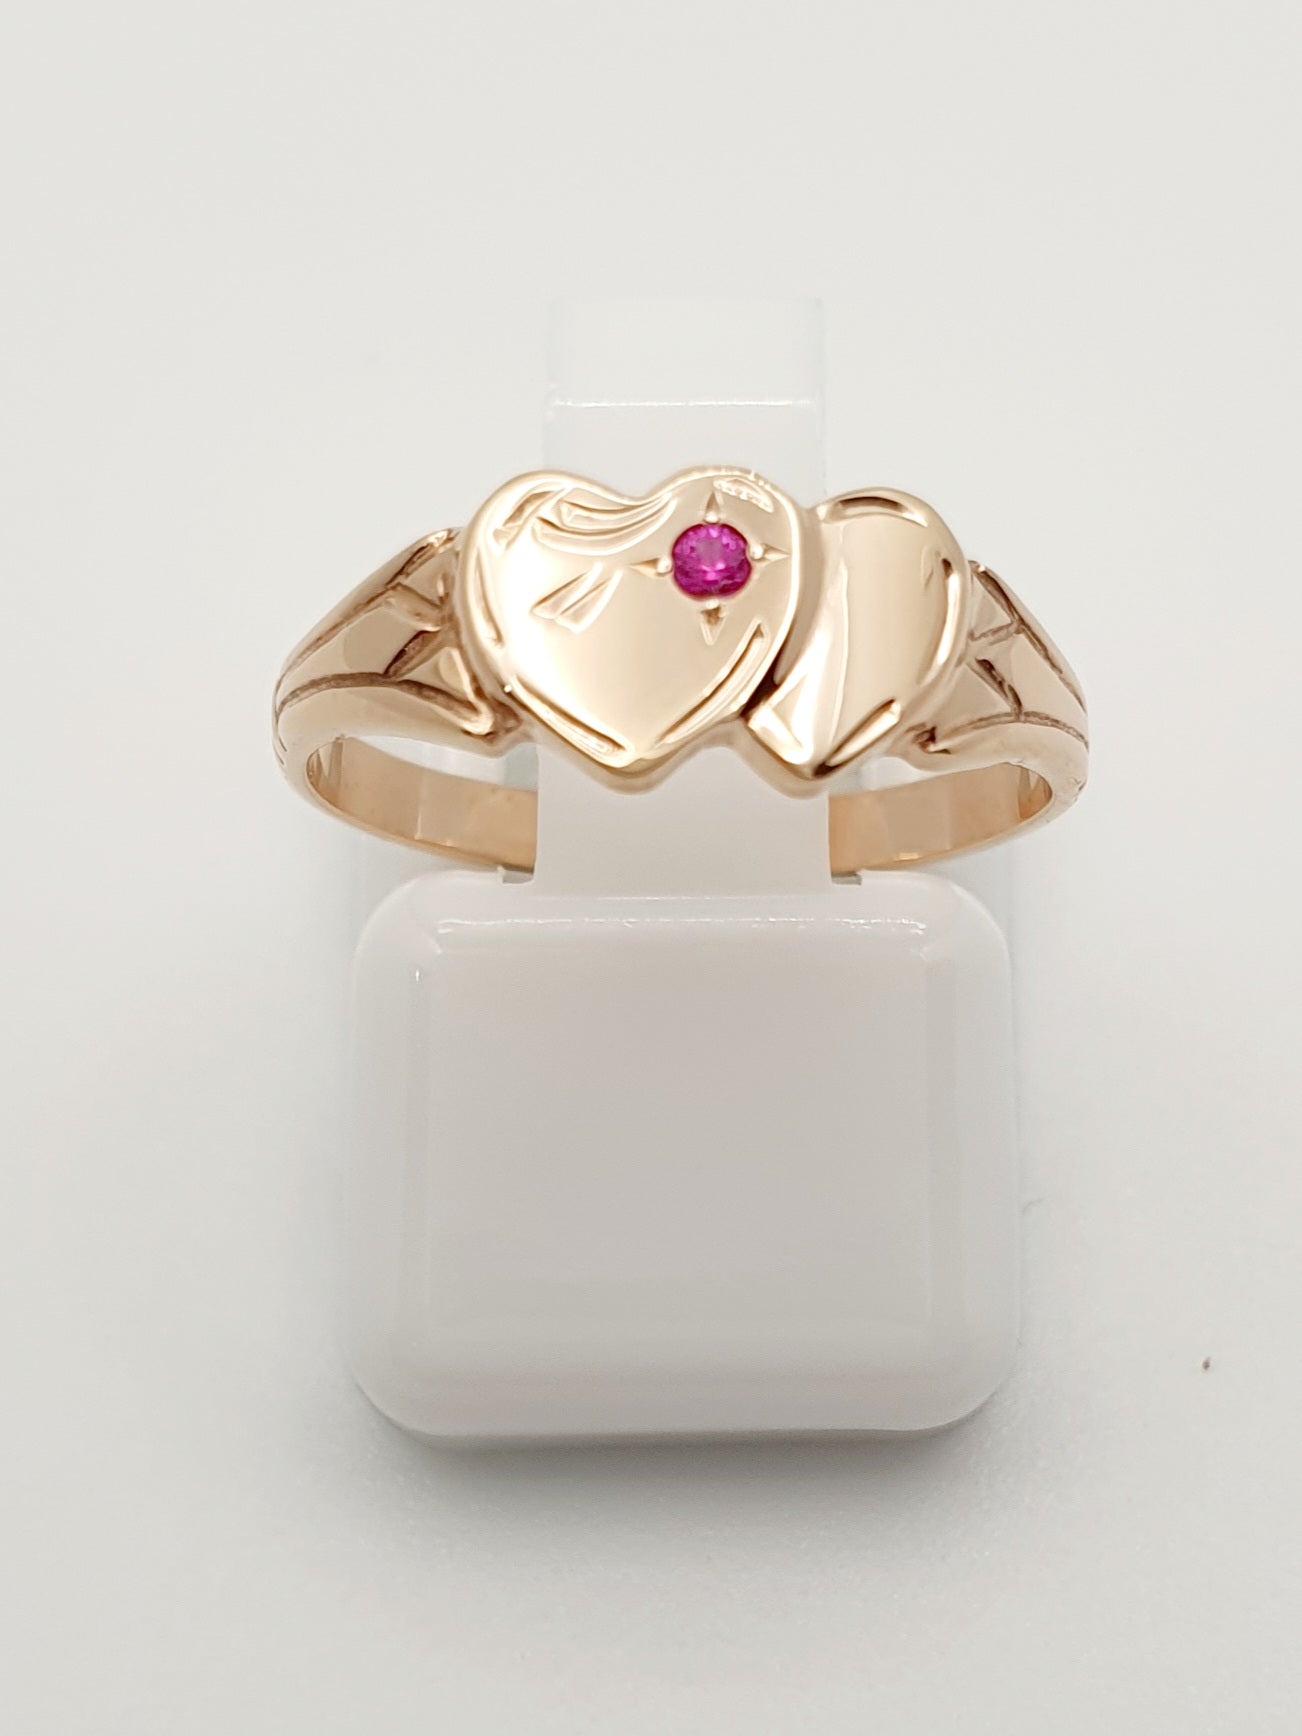 9ct Rose Gold, Double Heart Signet Ring with Red Stone. Size H